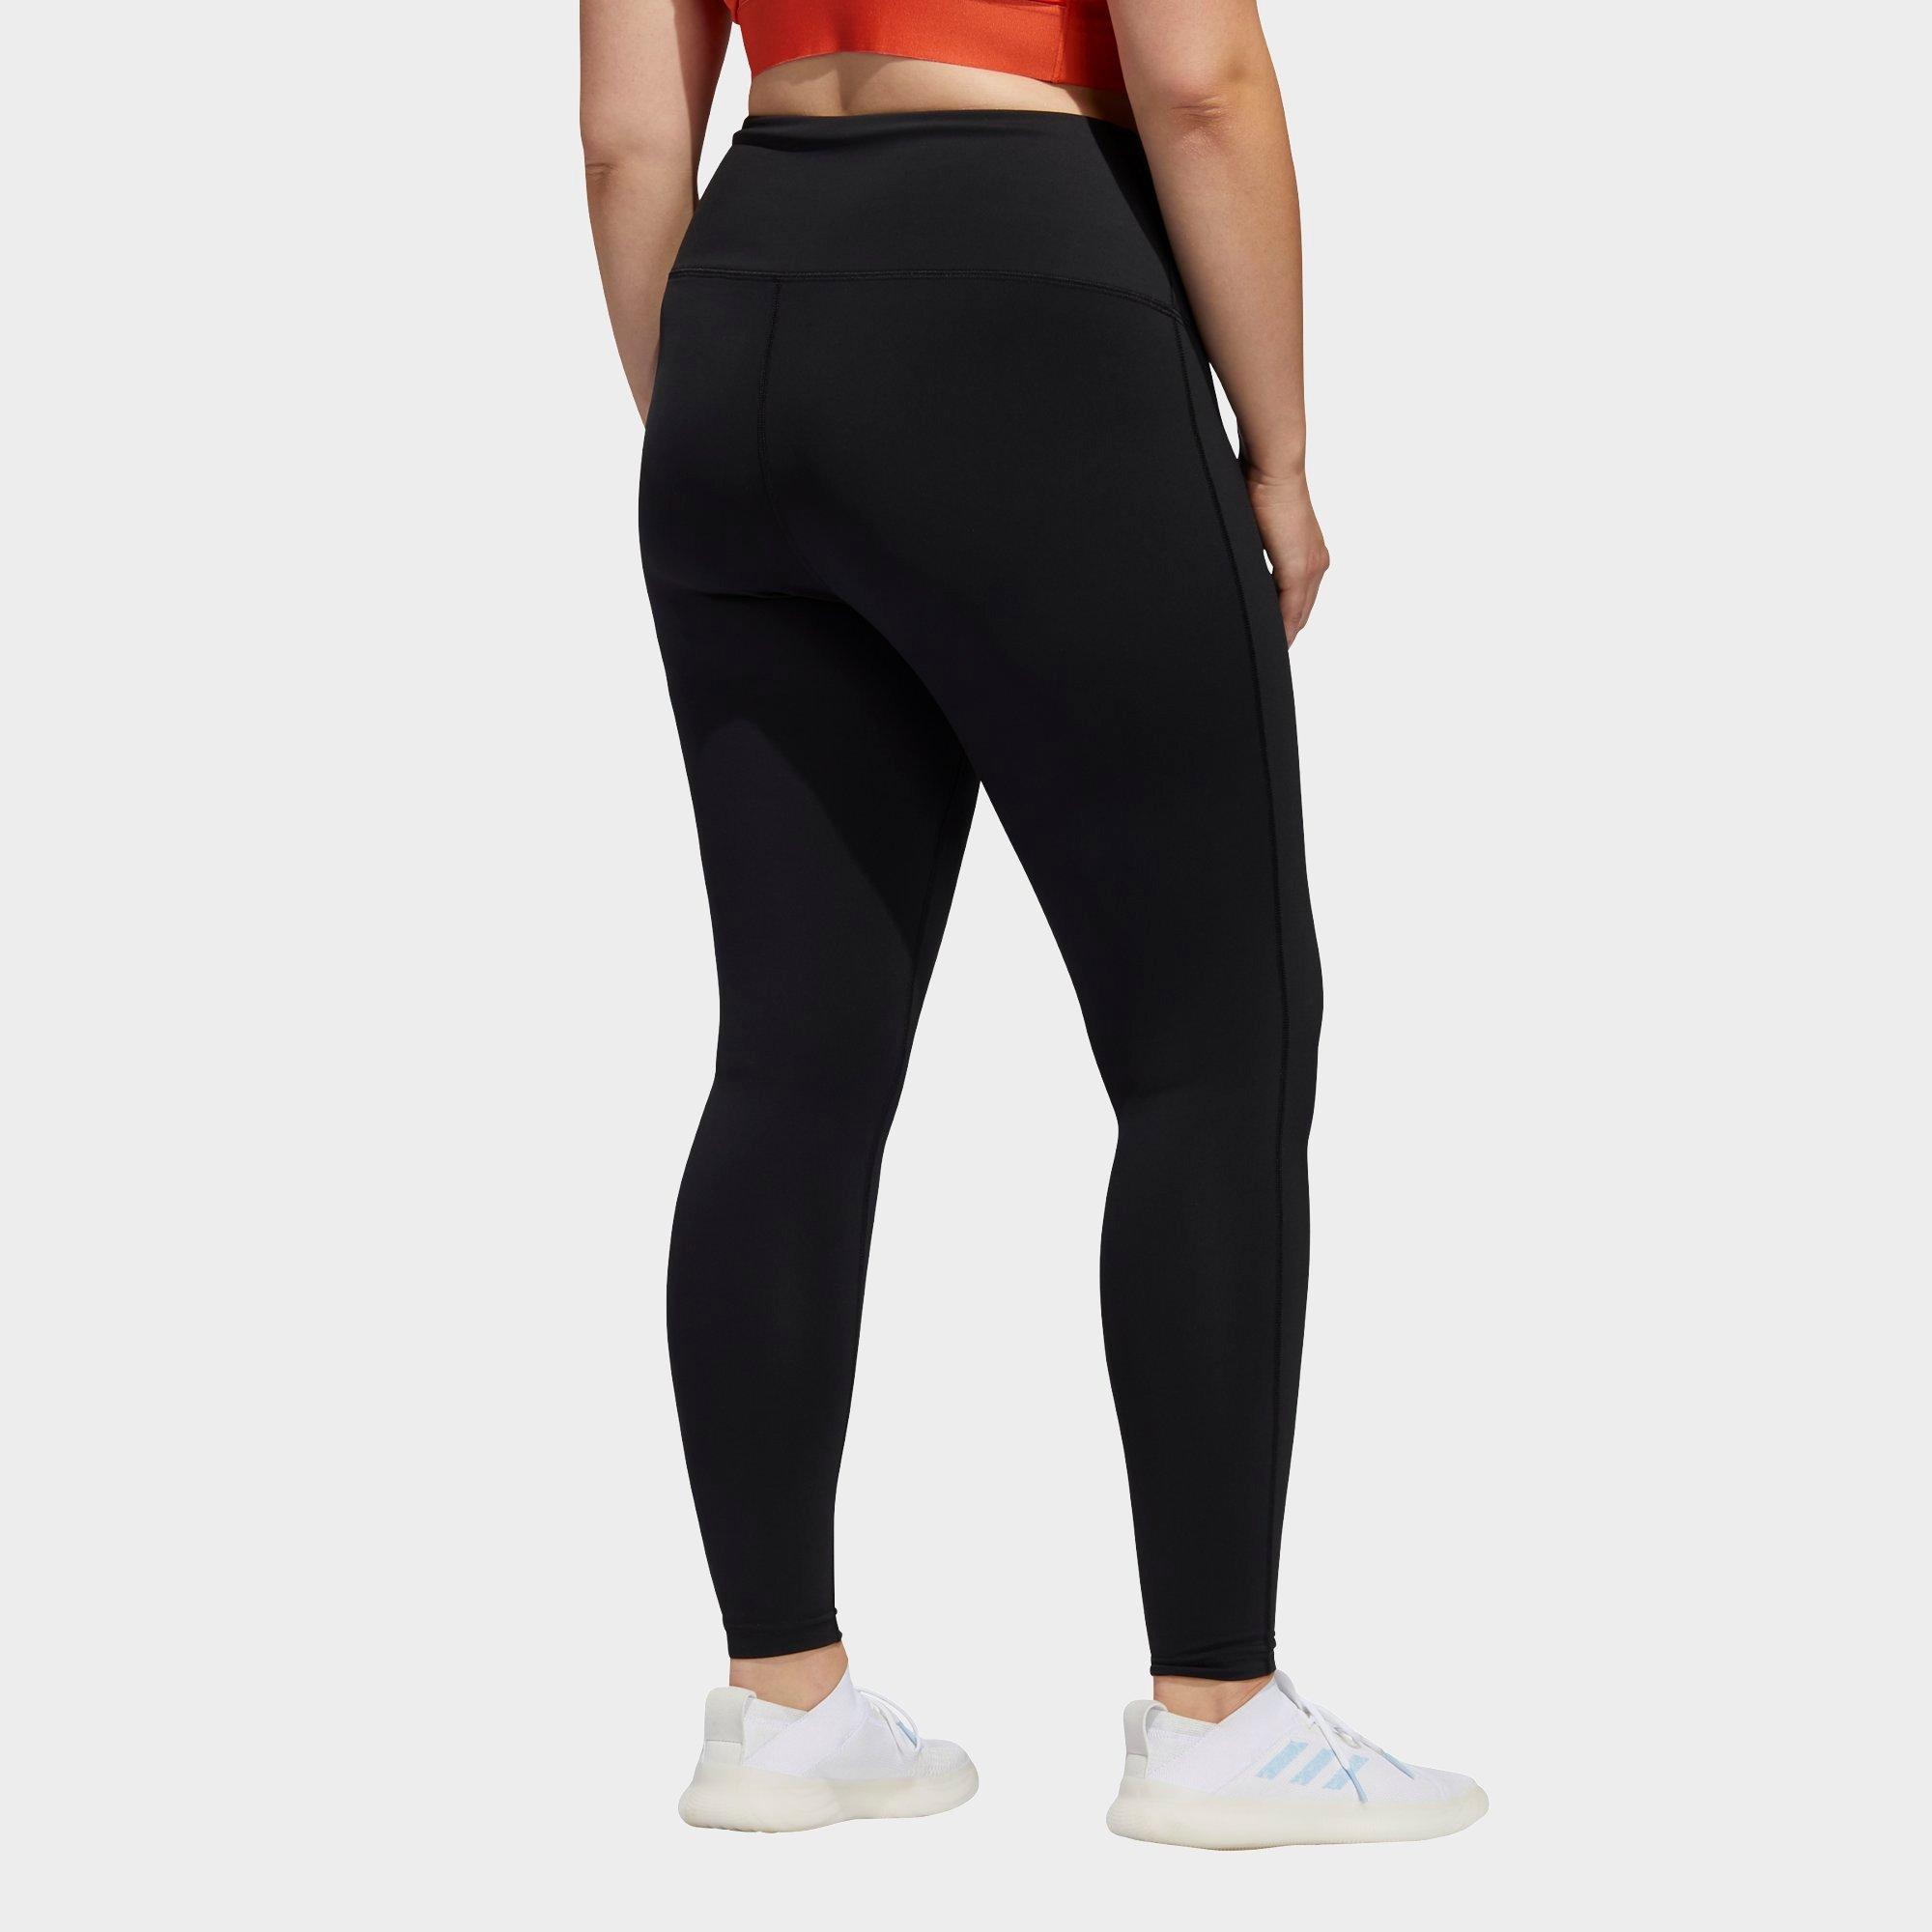 adidas believe this solid tights